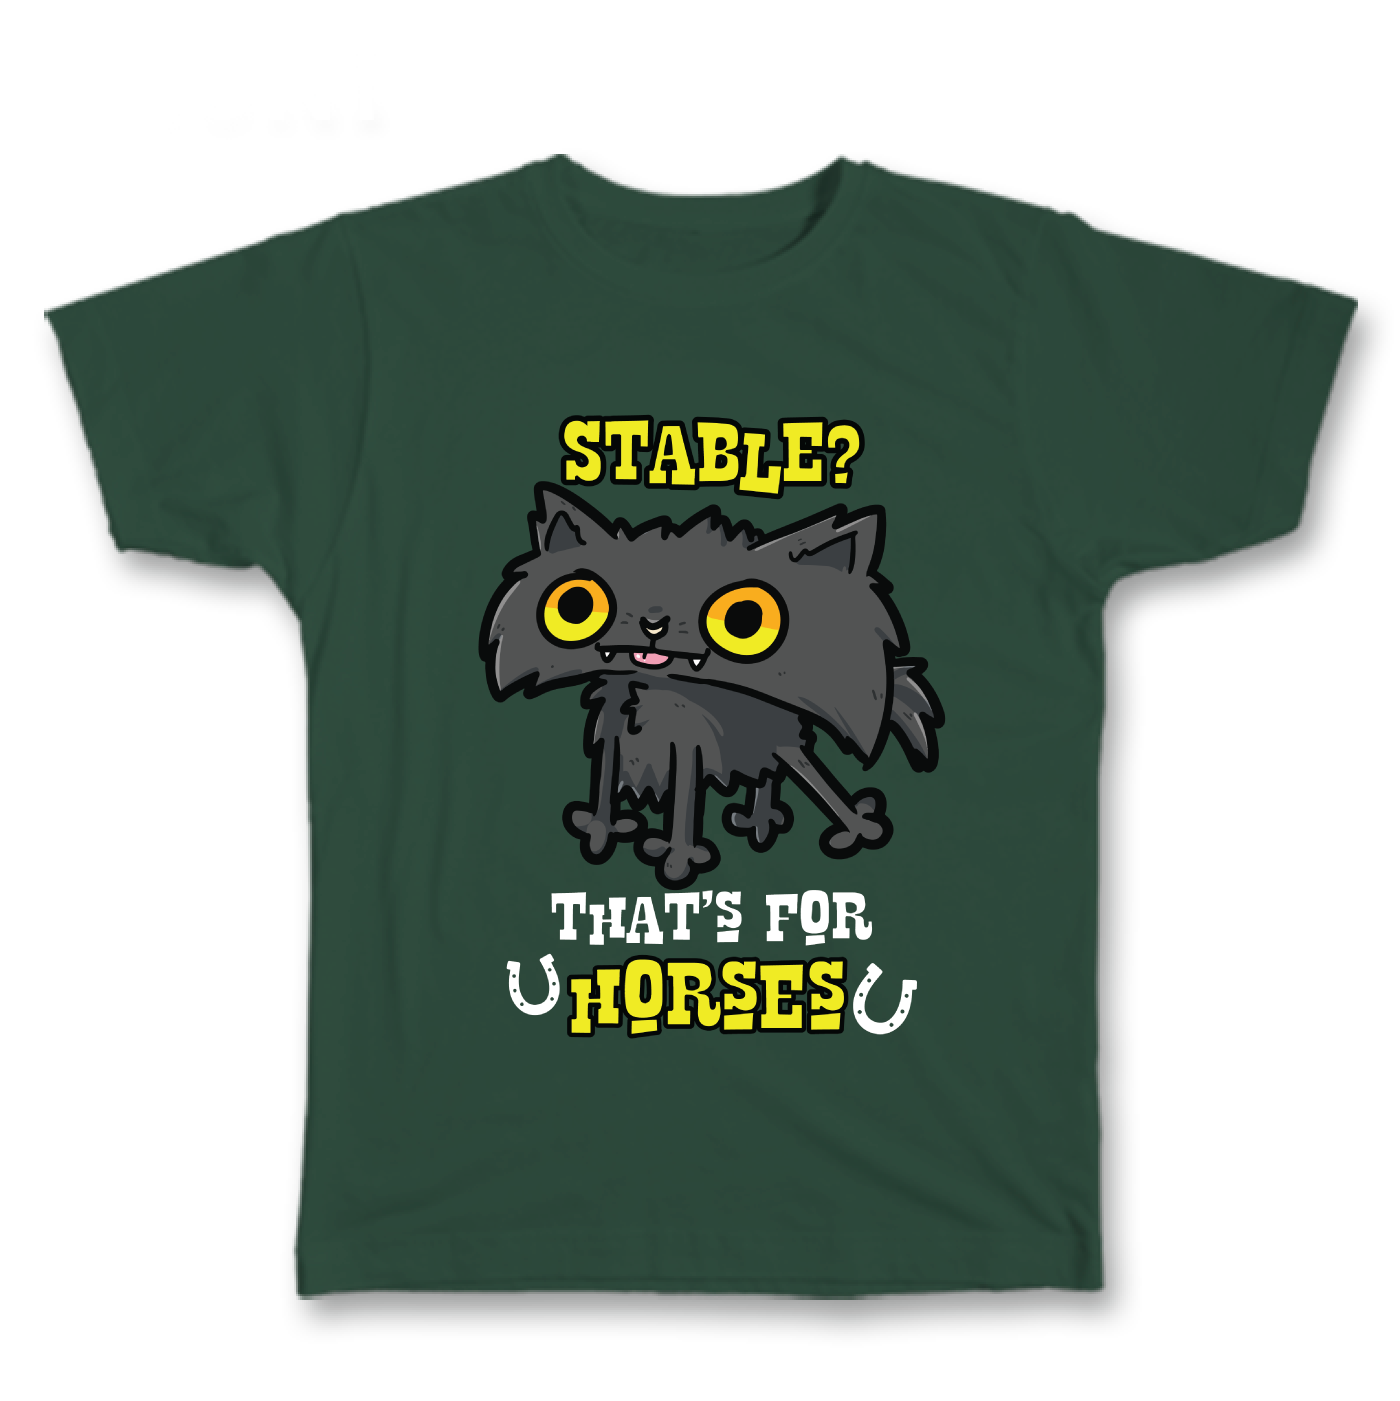 Stable? That's for Horses!